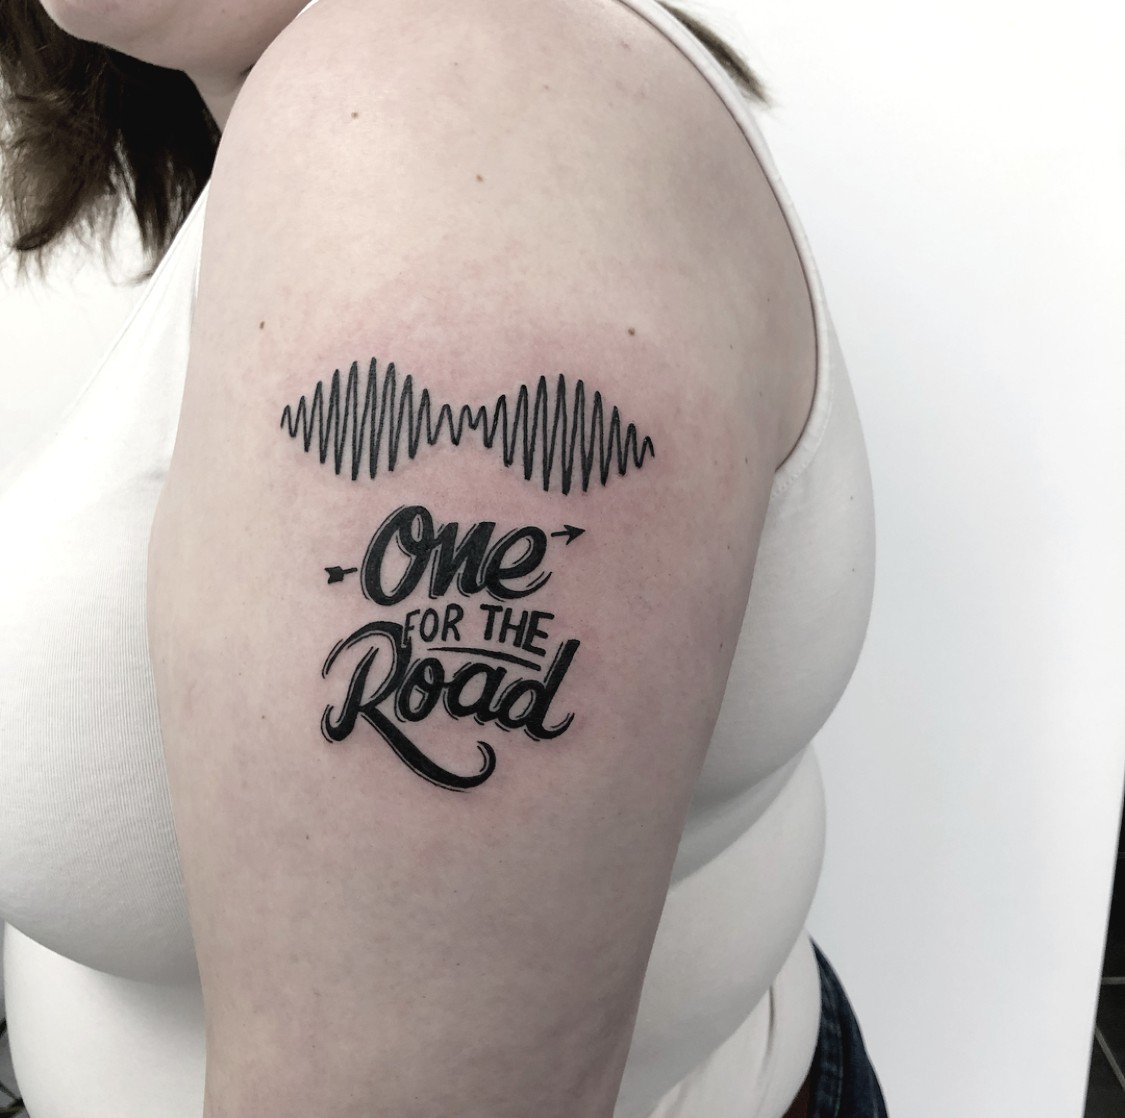 Mangorino on Twitter new tattoo Song lyrics off Fire and the Thud  Humbug album in love with it Theyaremylife ArcticMonkeys   httptcol9CIQmgtAk  Twitter